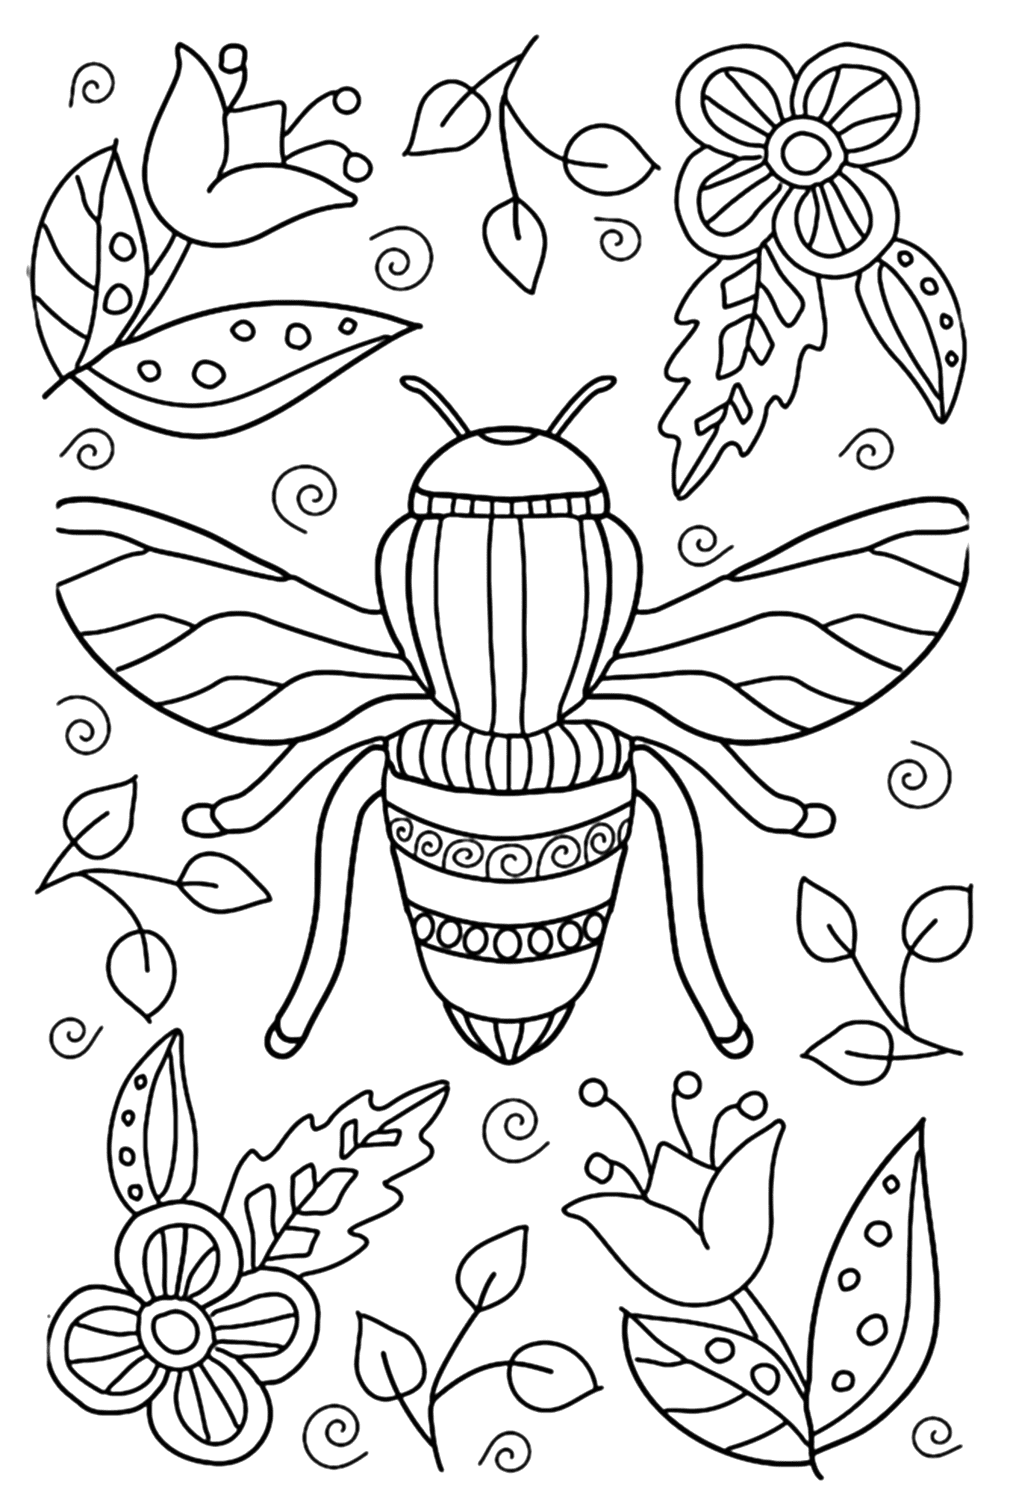 Bee Wasp And Flowers Coloring Page from Wasp